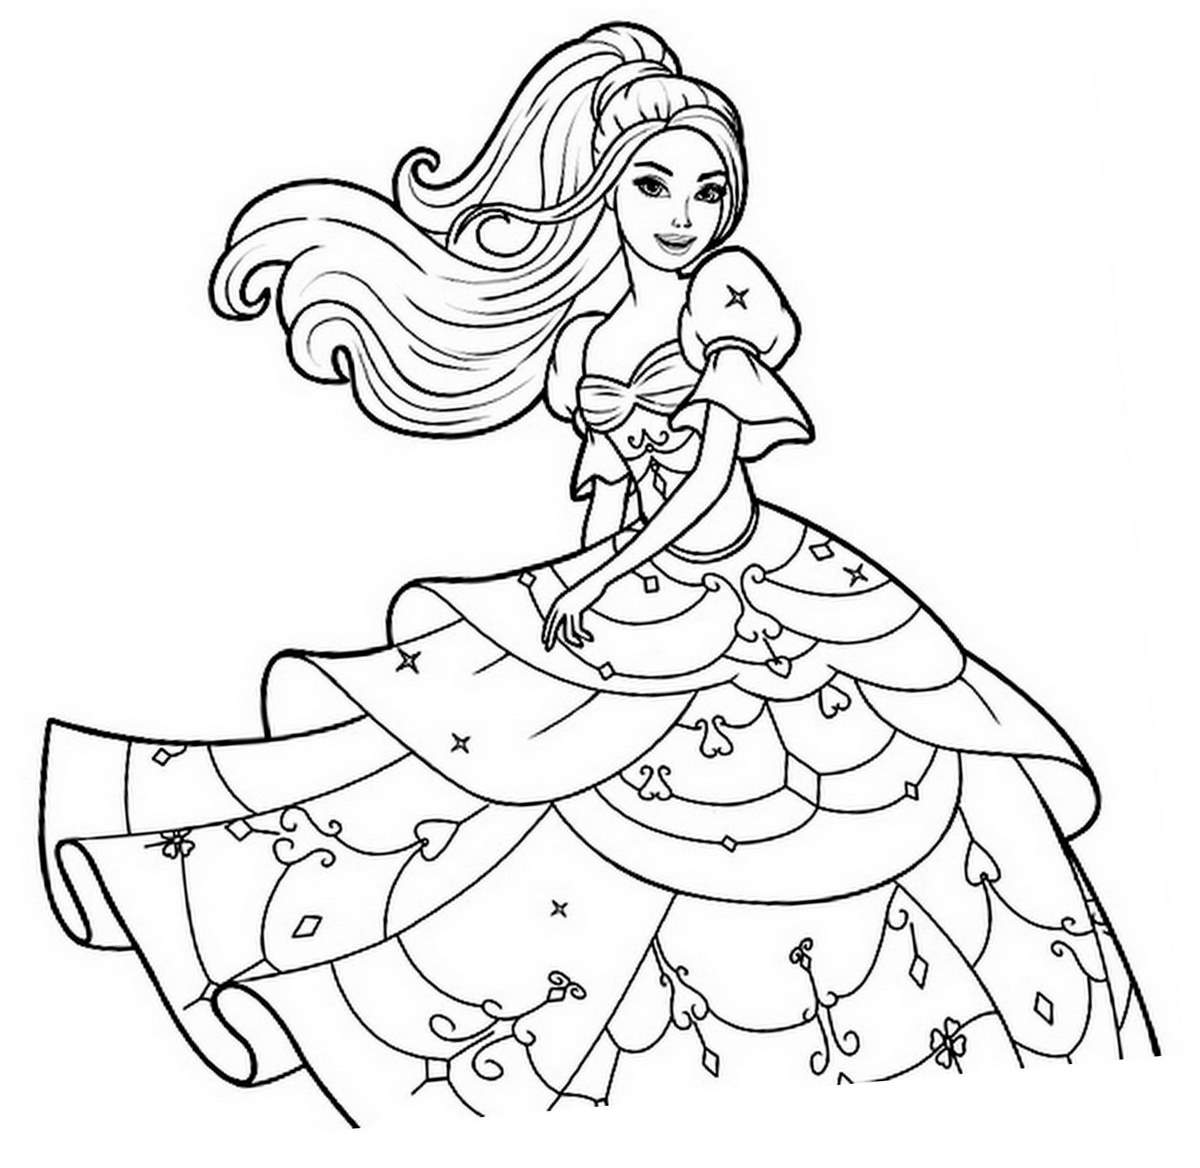 Princess image to print and color Princesses Kids Coloring Pages